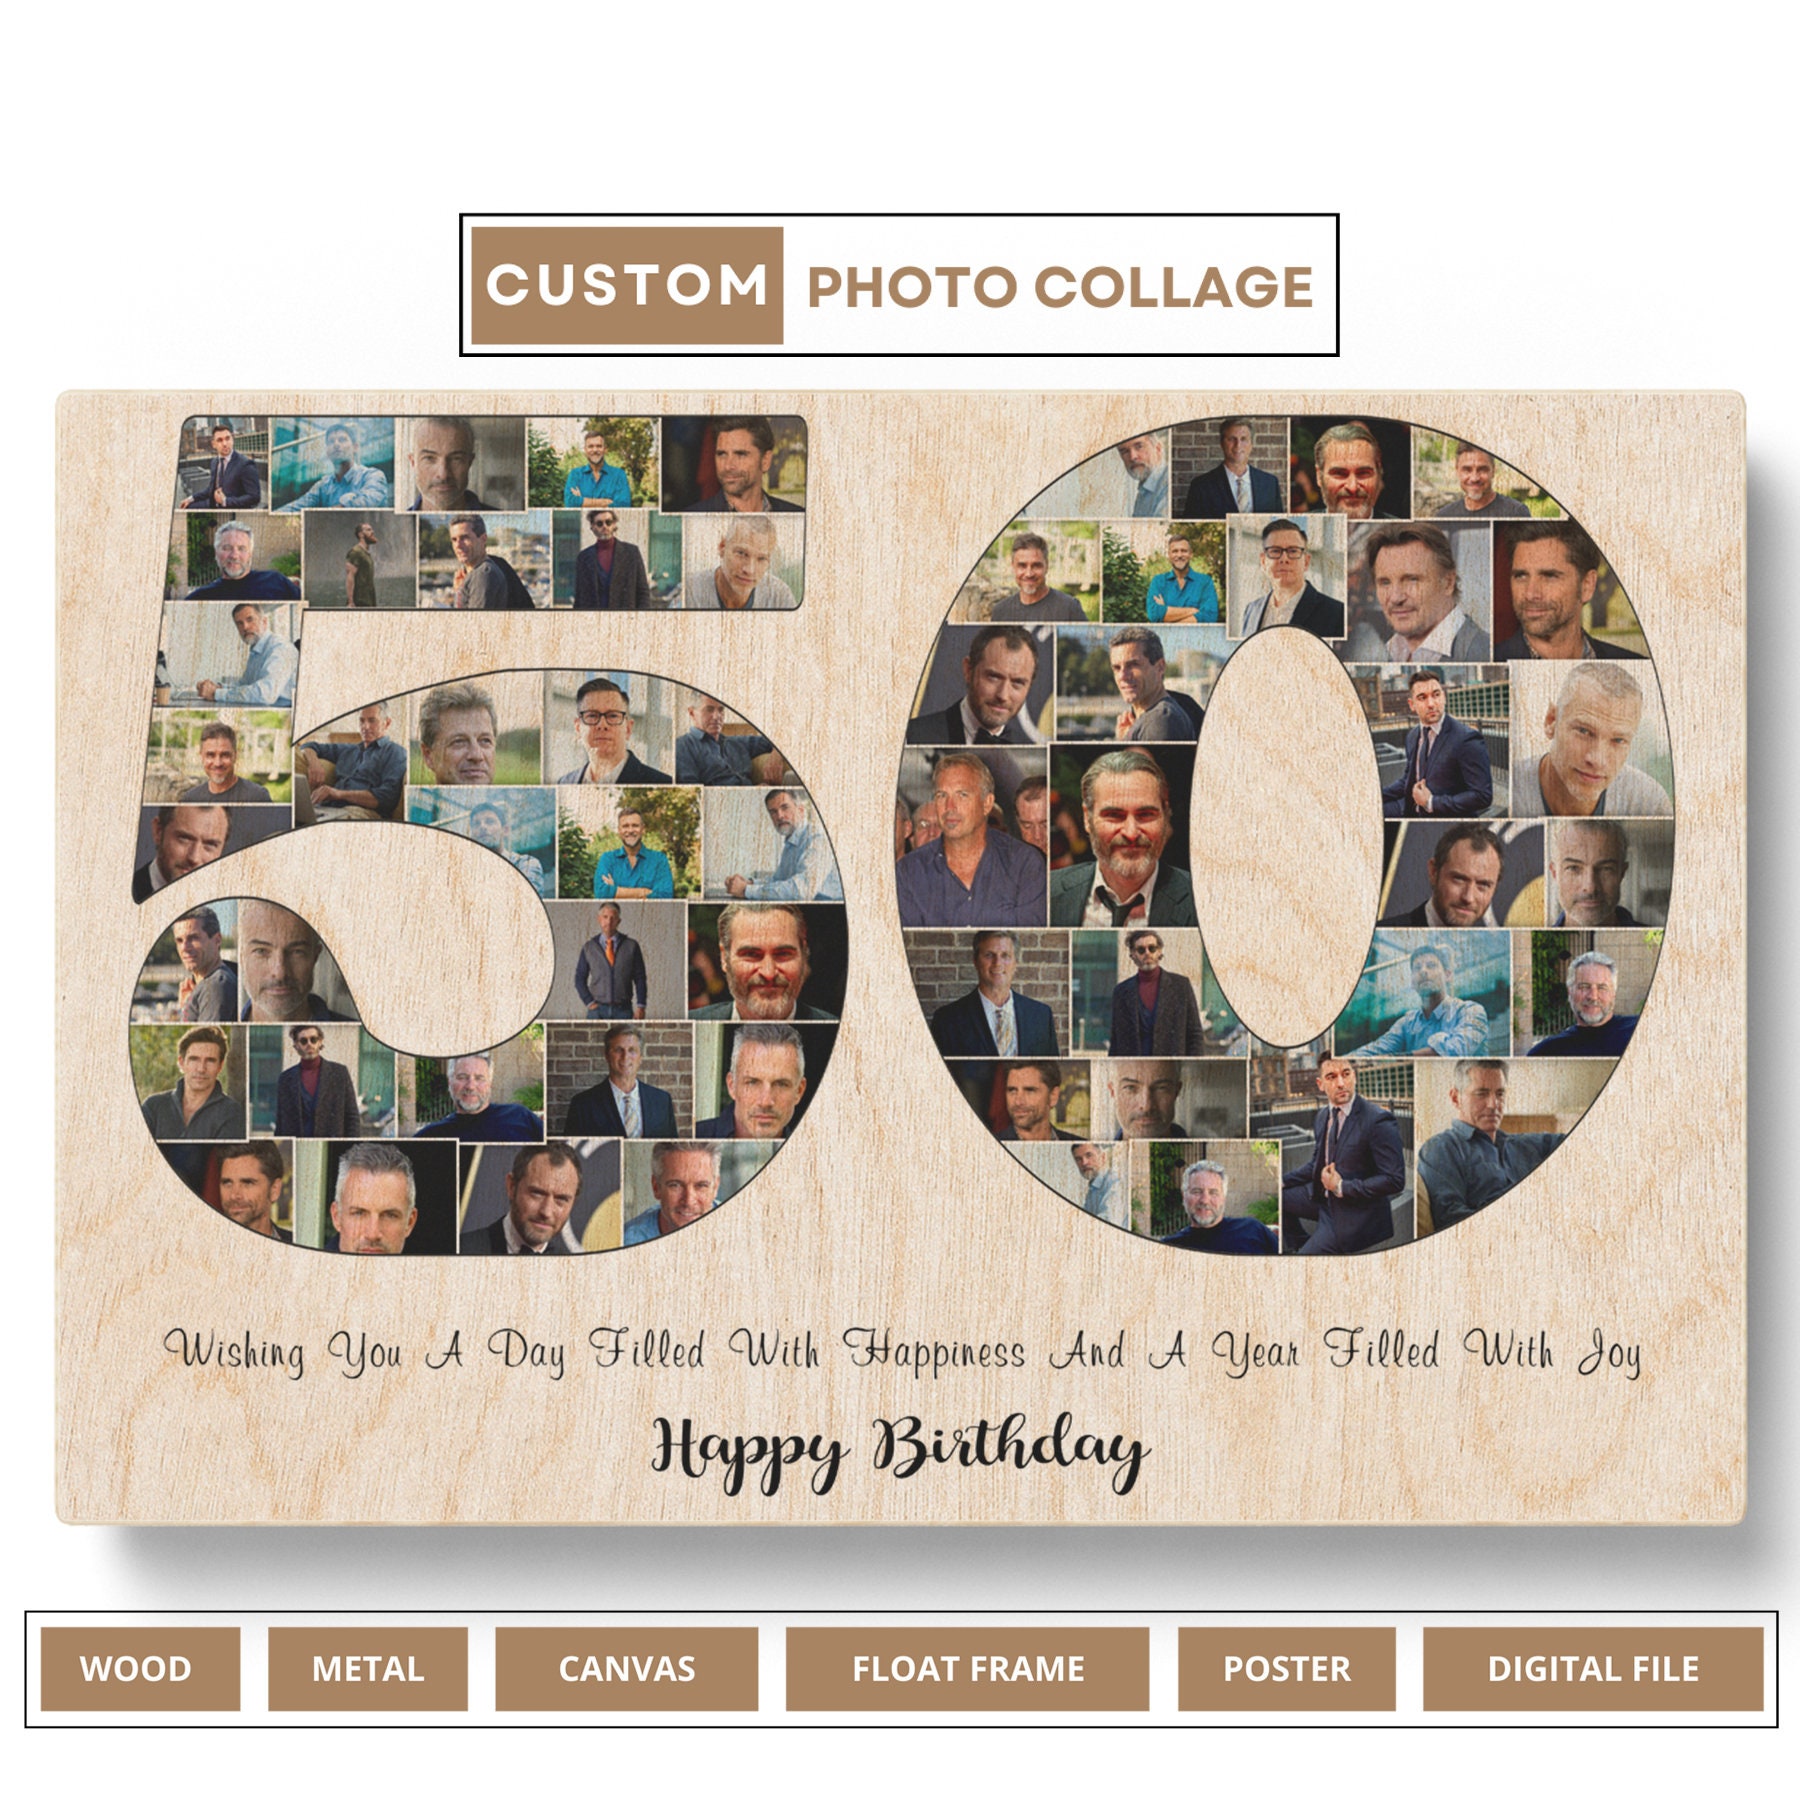 Personalized 50th Birthday Gift Inspiration For Her